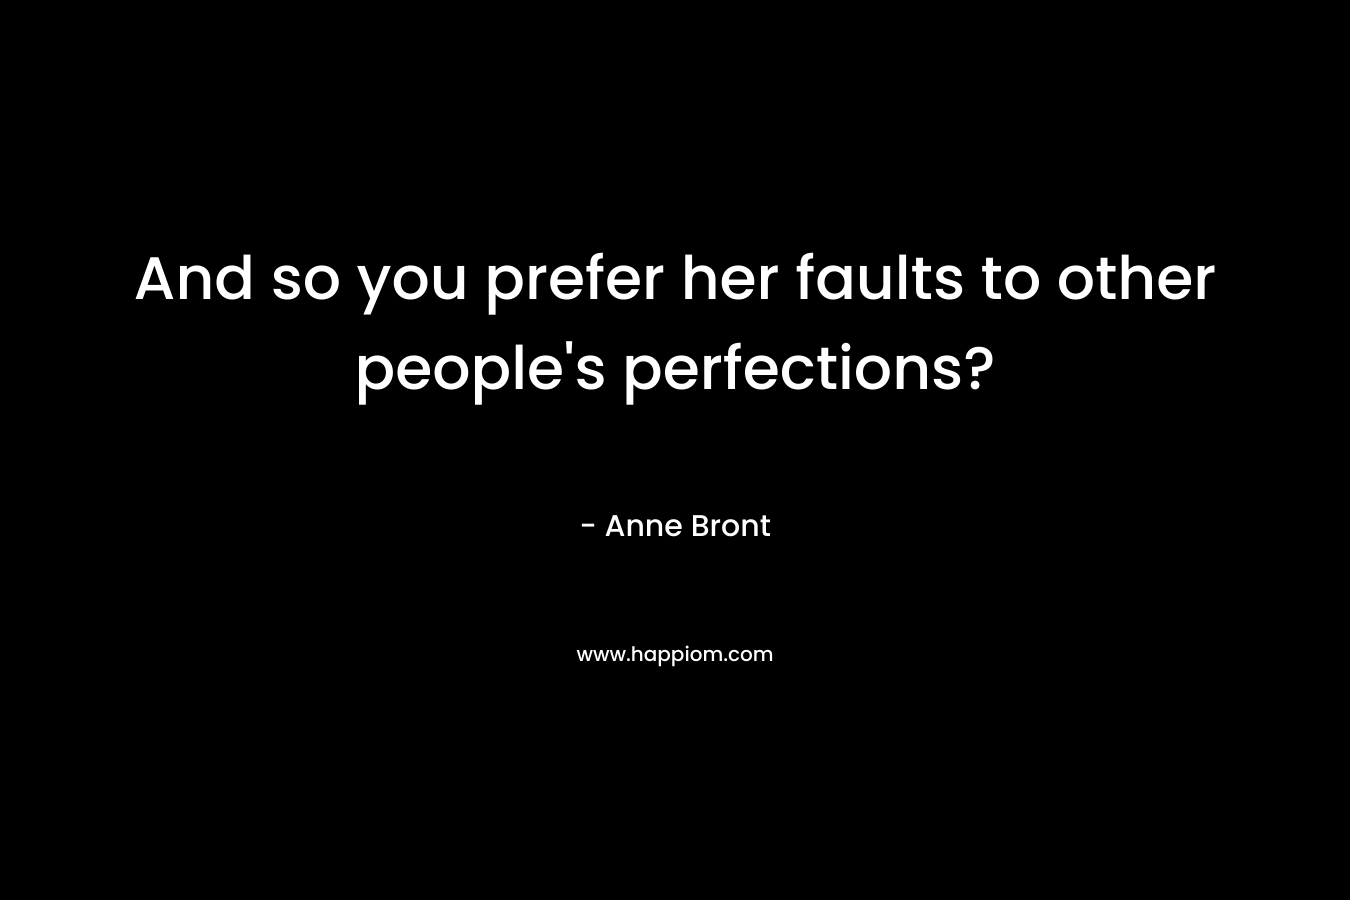 And so you prefer her faults to other people’s perfections? – Anne Bront